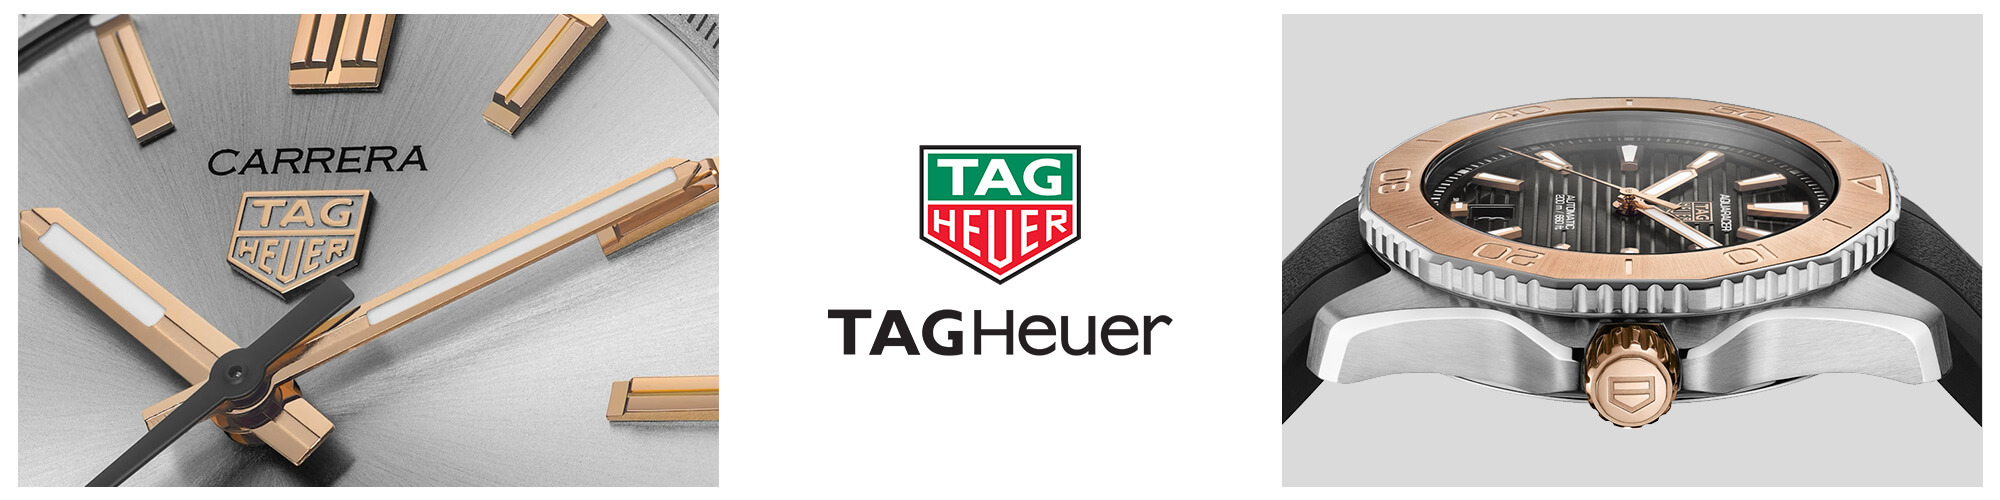 /colecoes-tag-heuer